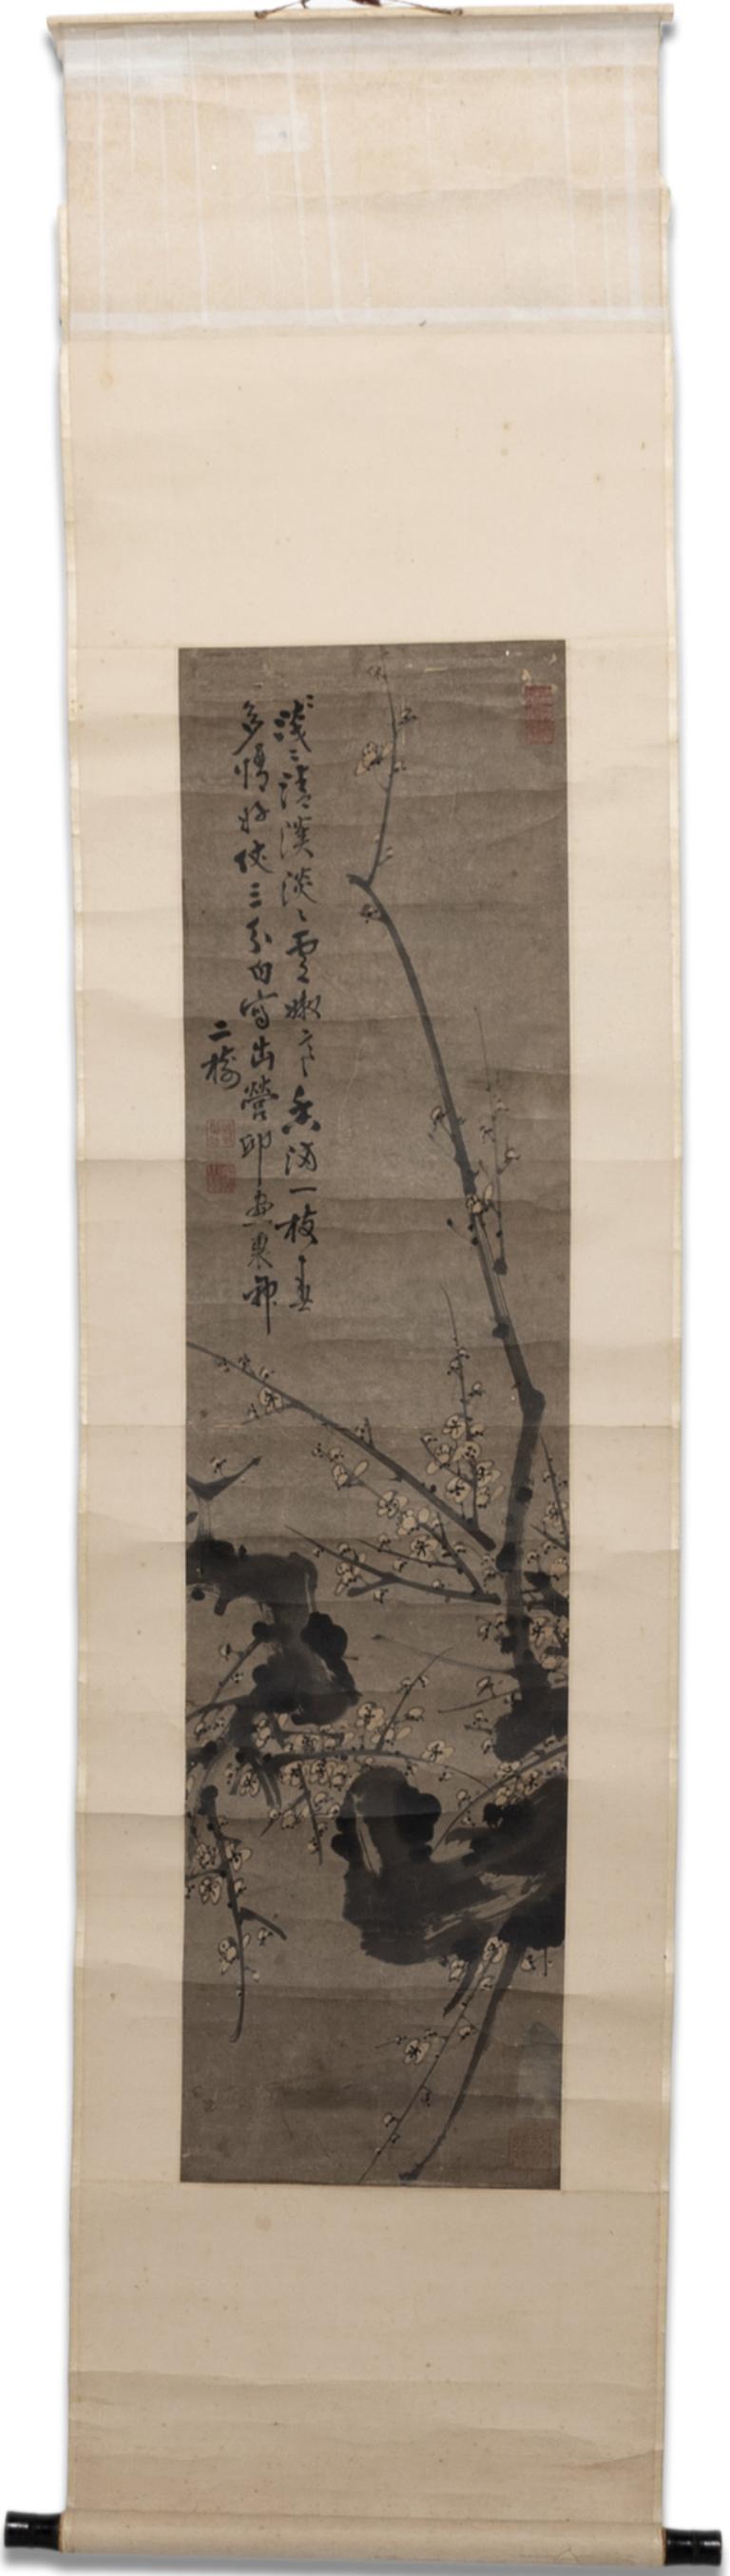 Tong Yu Figurative Art - "Hanging Scroll of Prunus Branches, " Ink on Paper, 1850